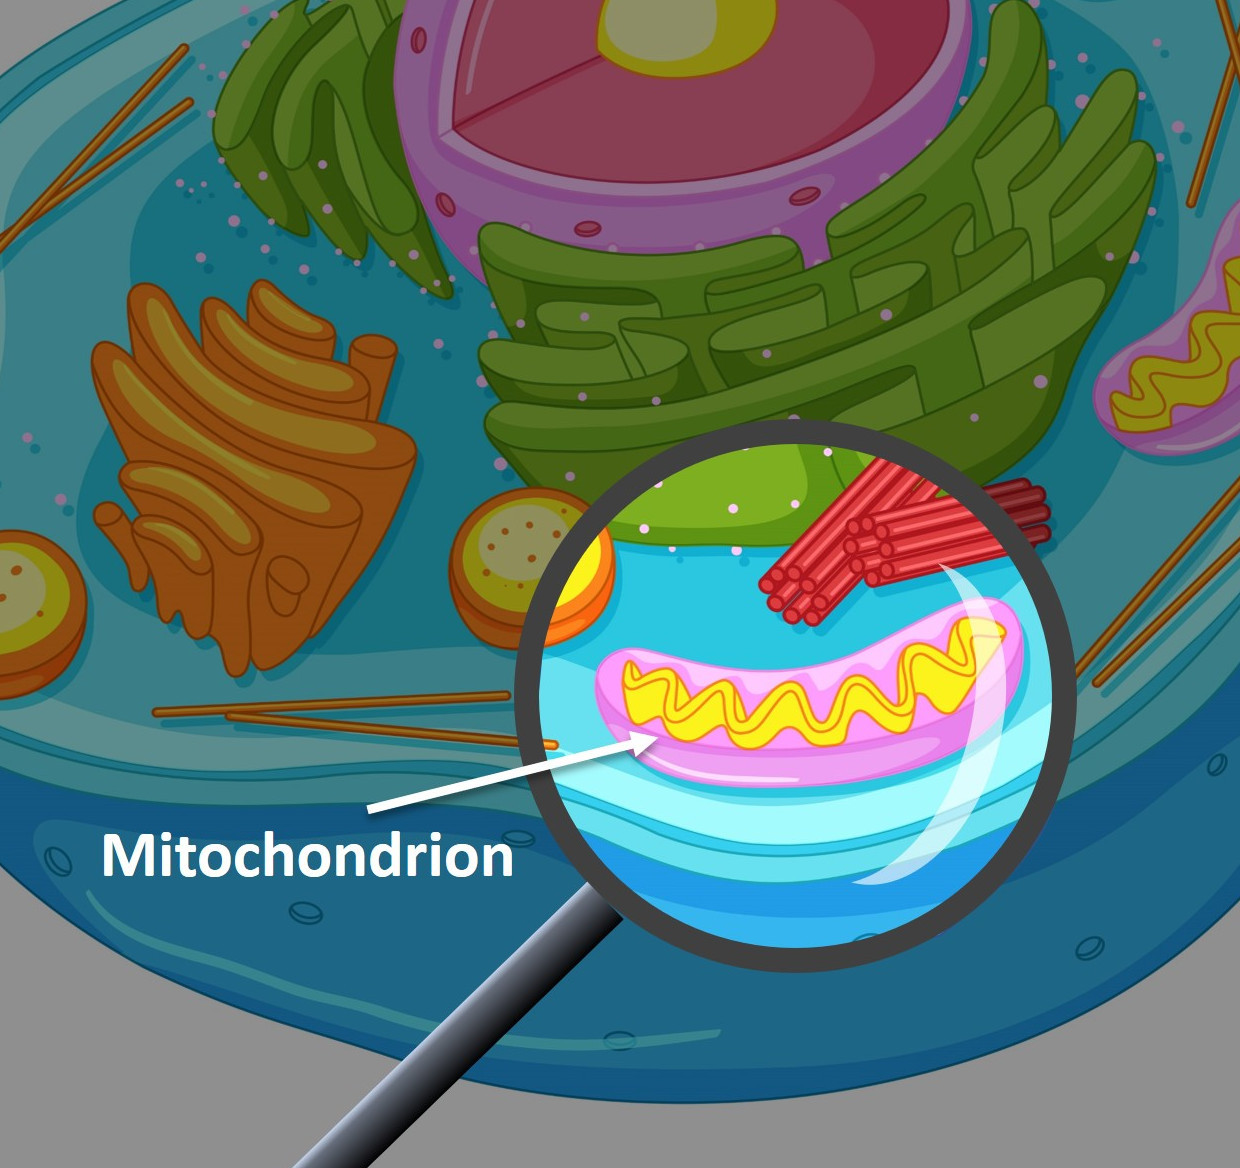 Image showing mitochondrion in a cell